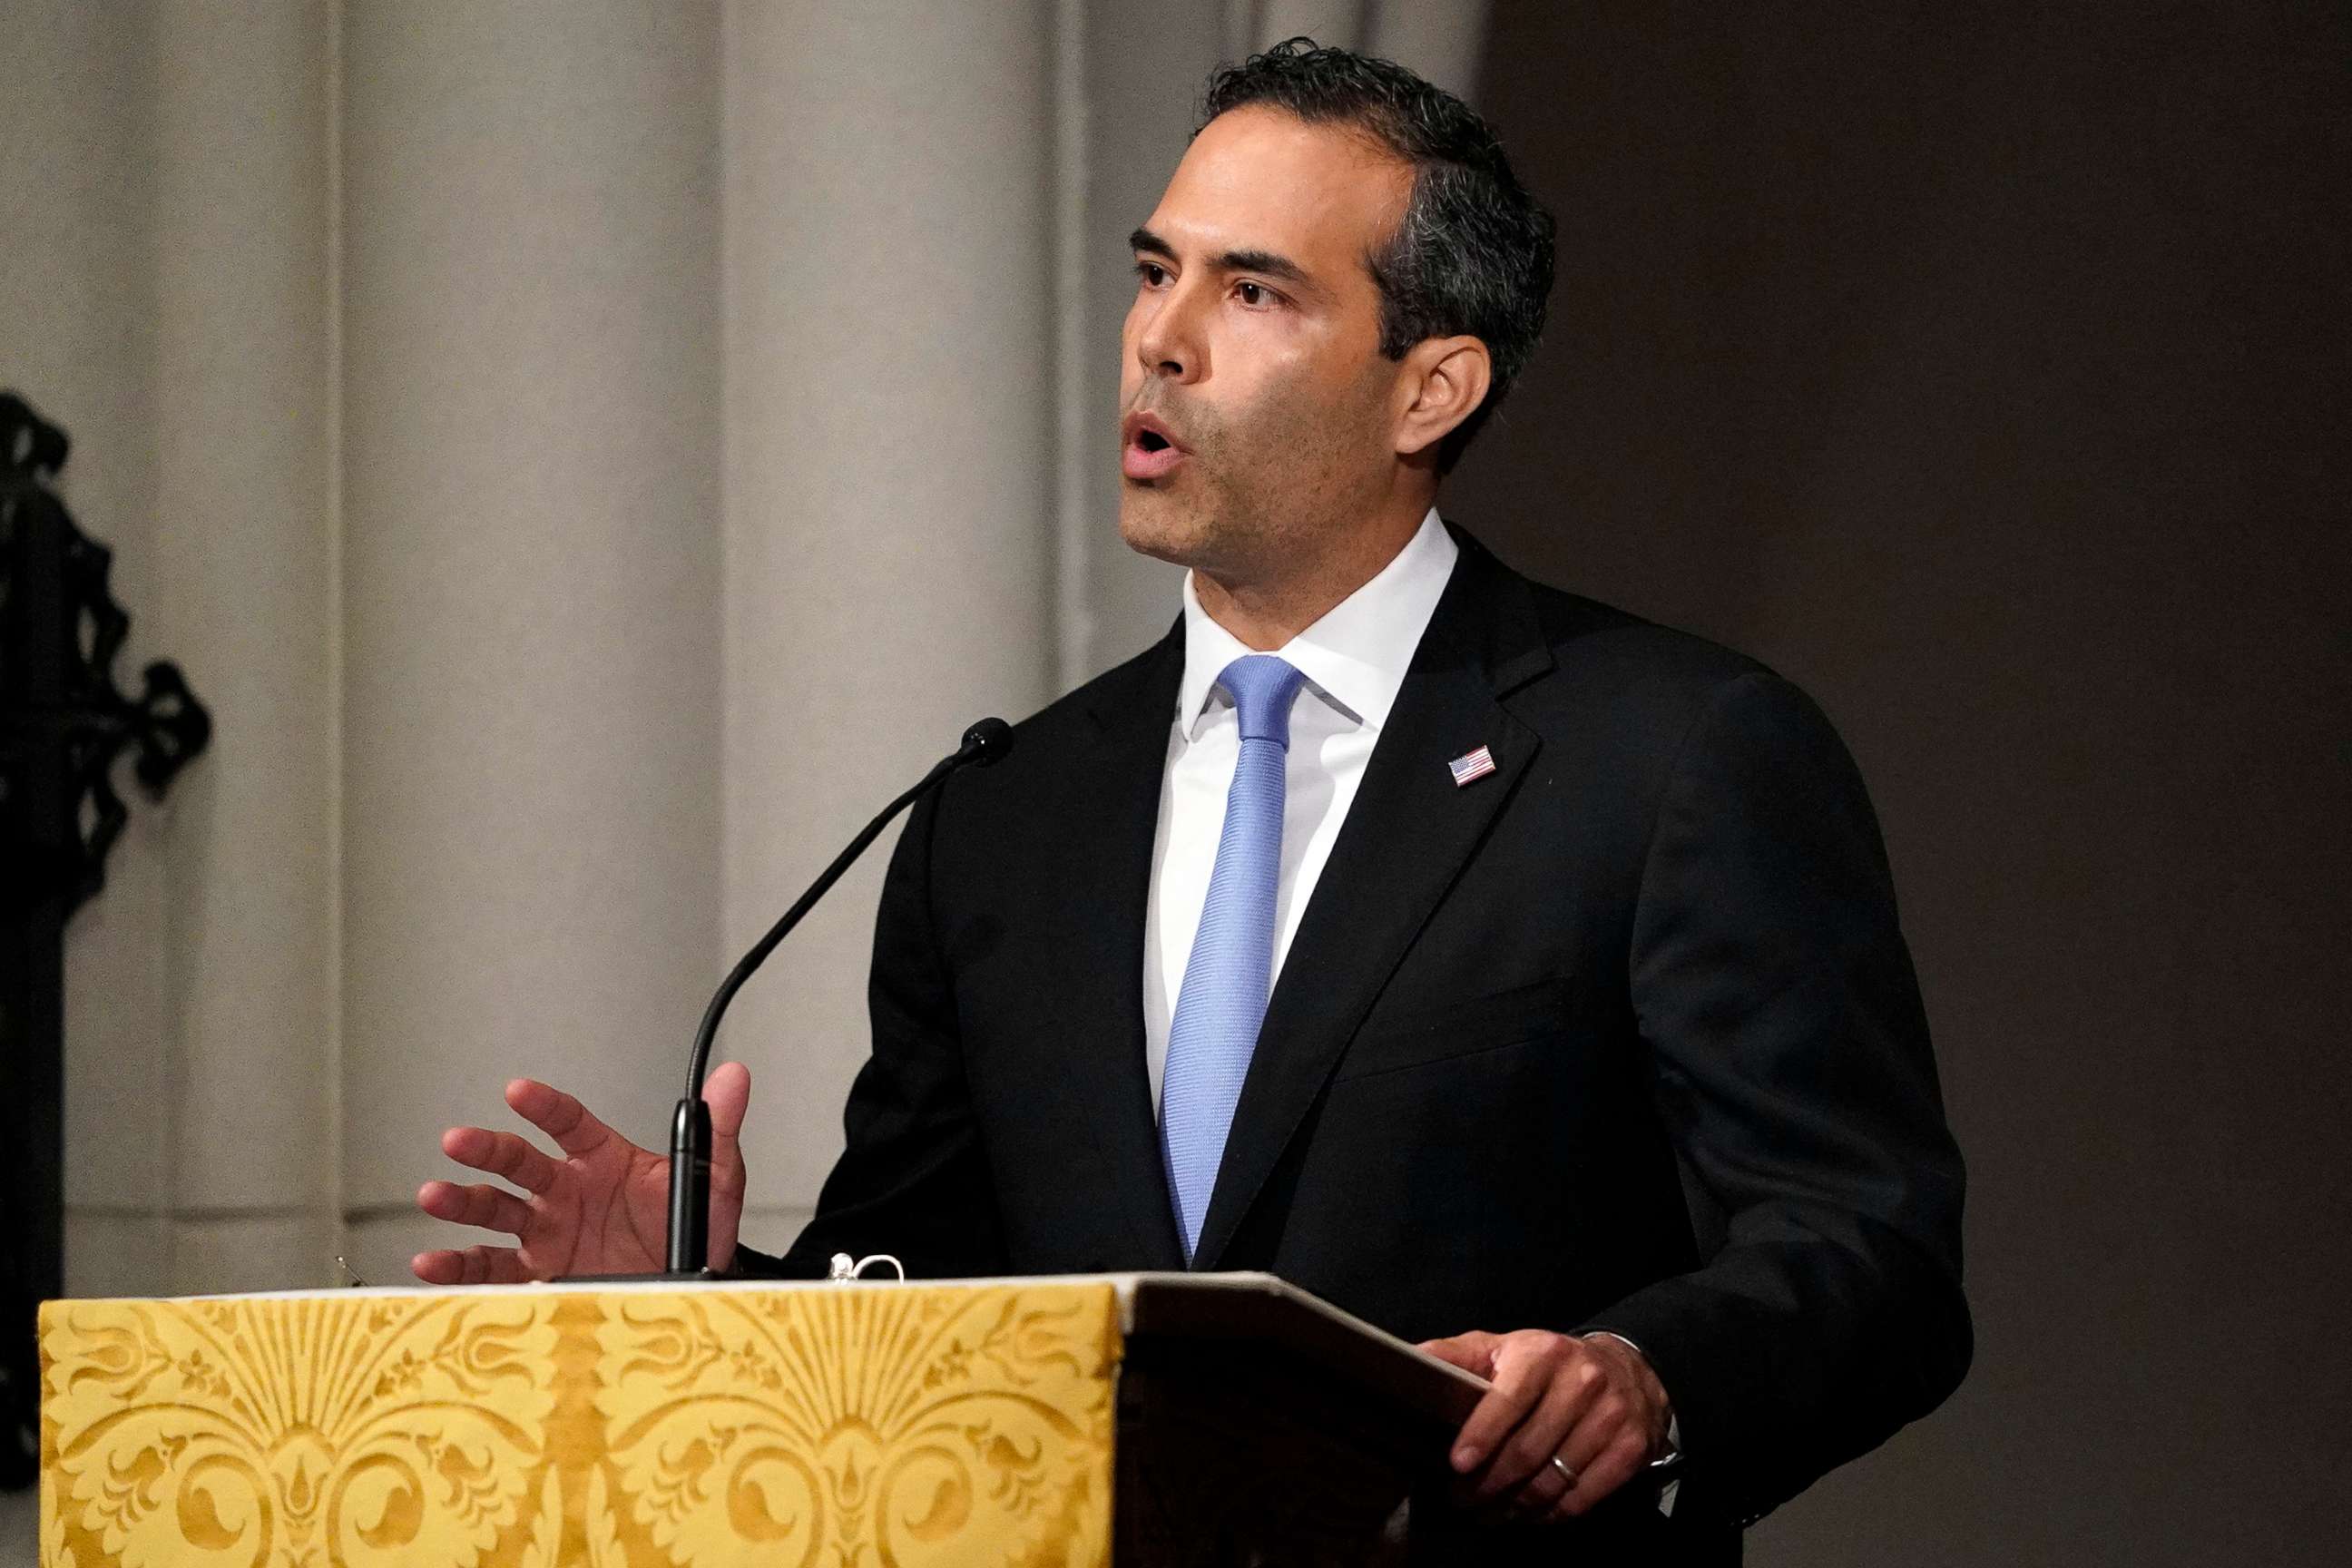 PHOTO: George P. Bush, son of former Florida Governor Jeb Bush, speaks during a funeral service for former President George H.W. Bush at St. Martin's Episcopal Church in Houston, Dec. 6, 2018. 